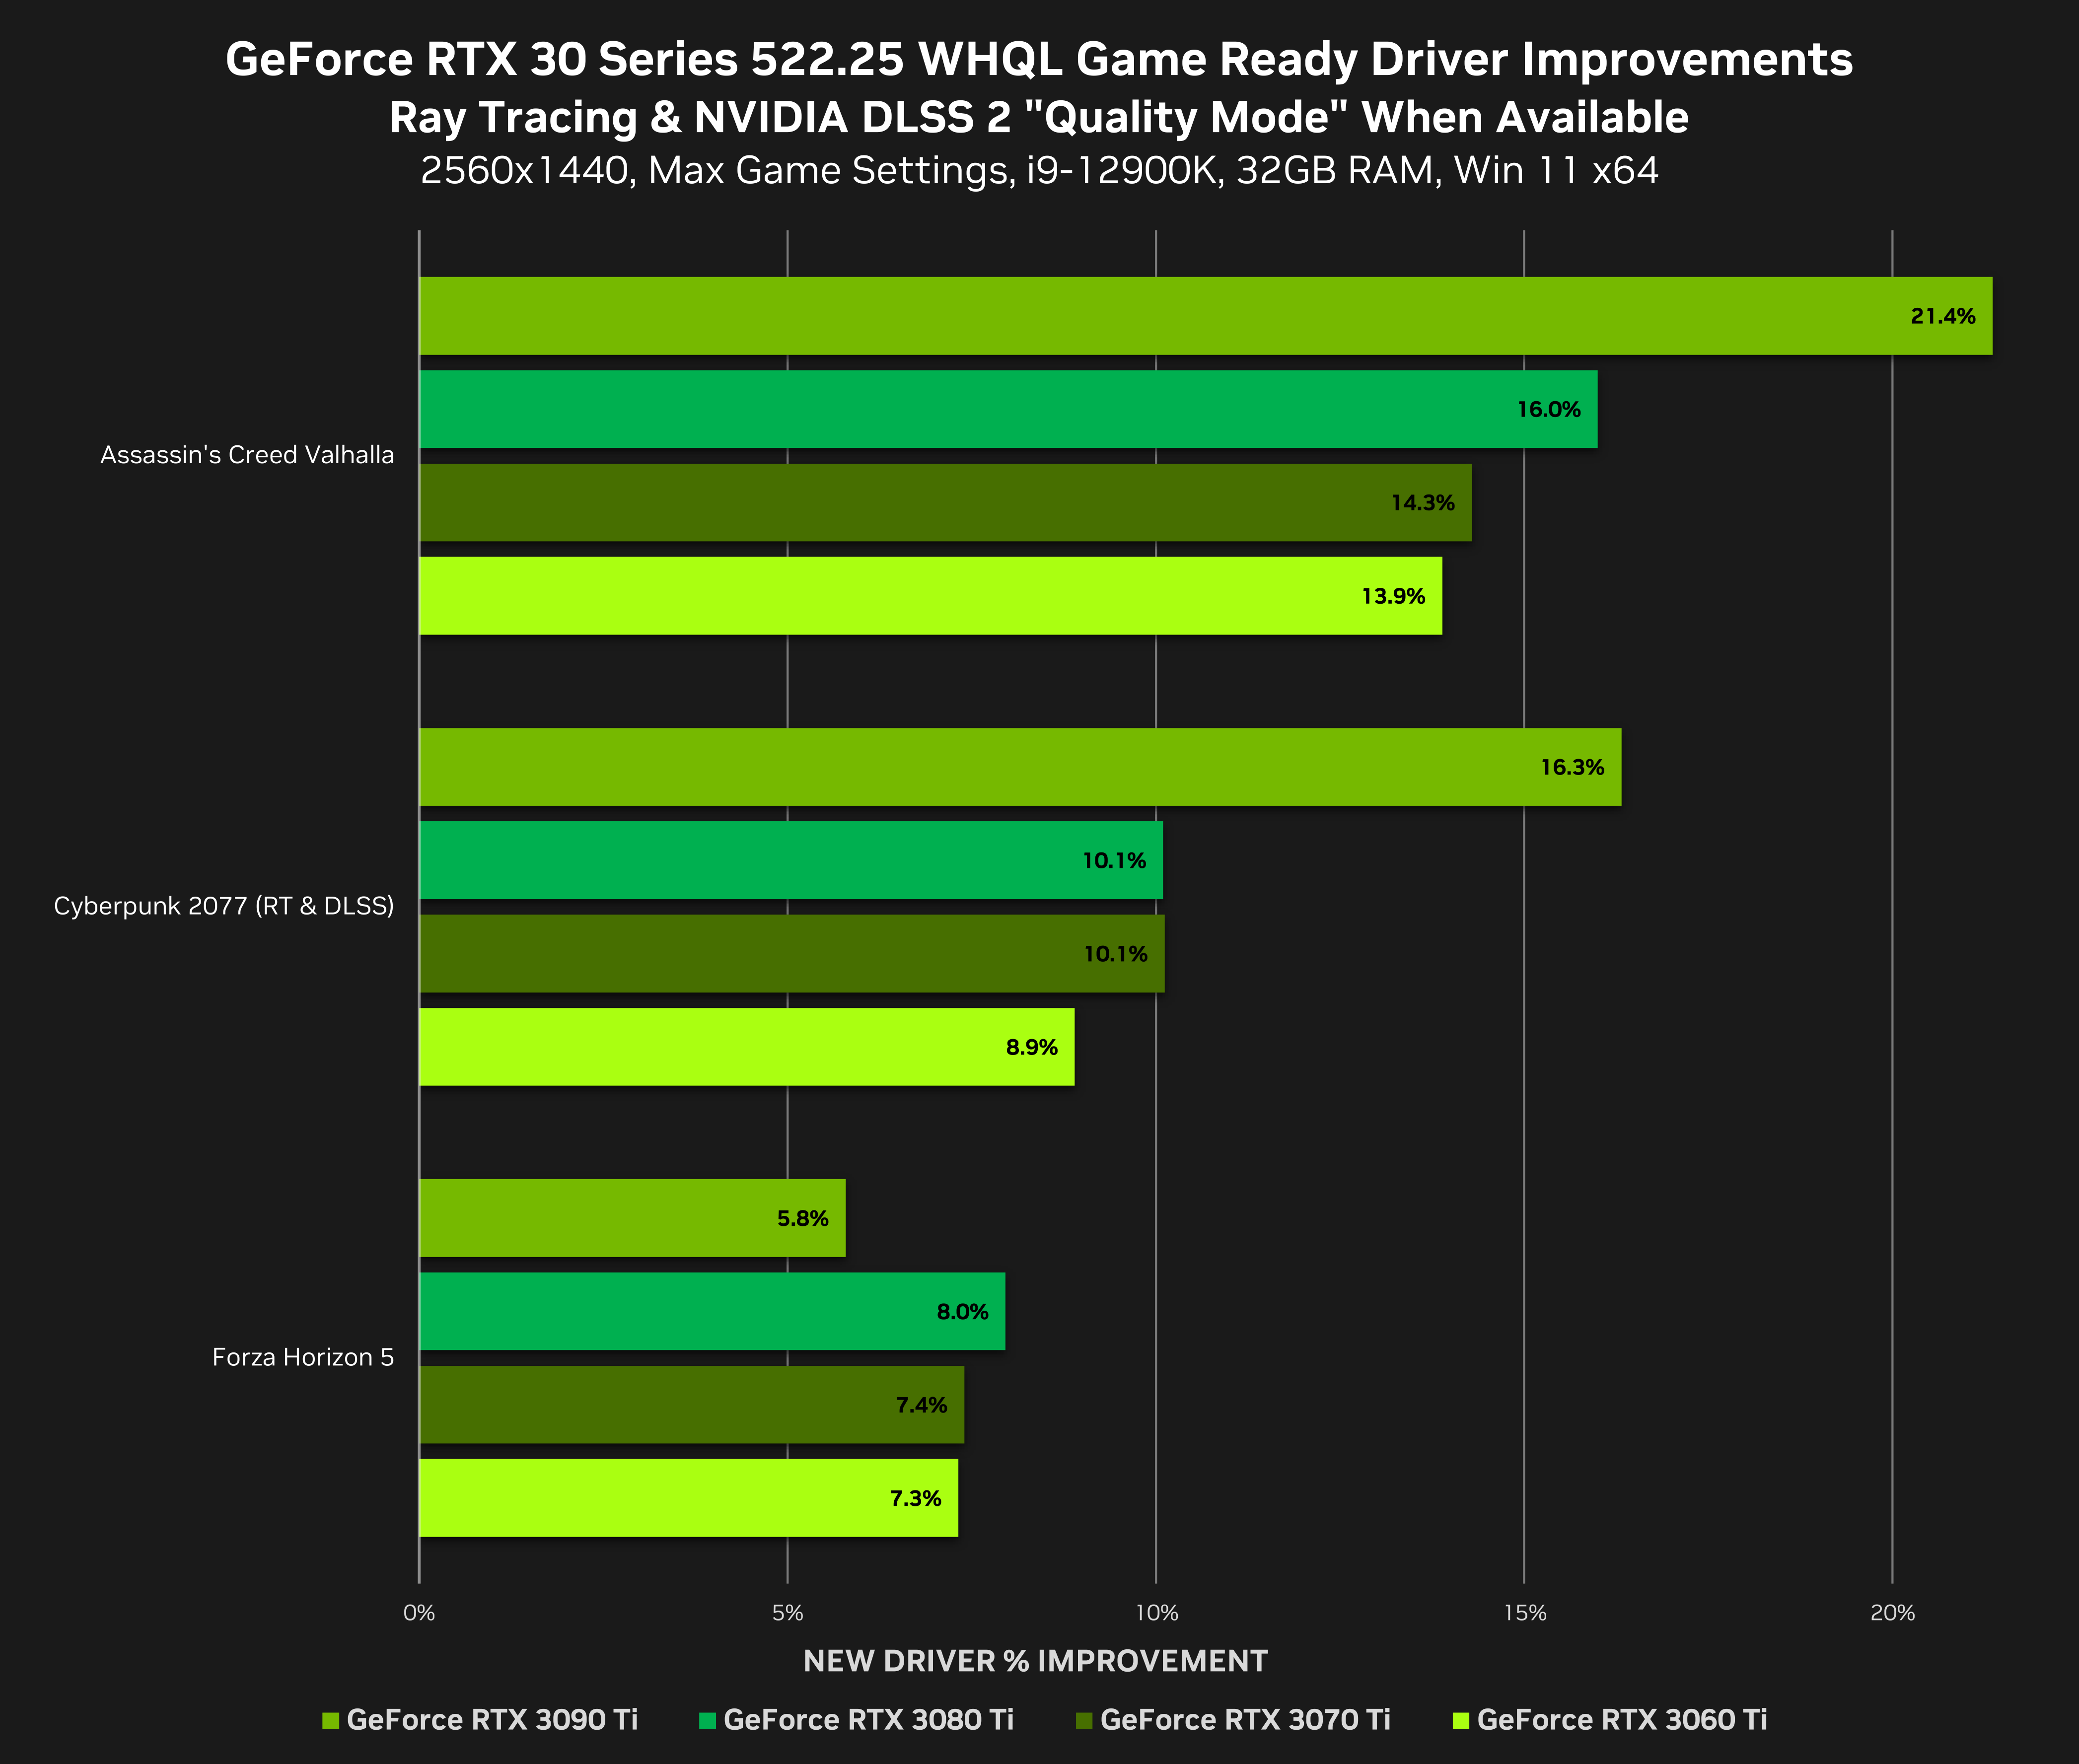 How to test your PC's DirectX 12 performance today